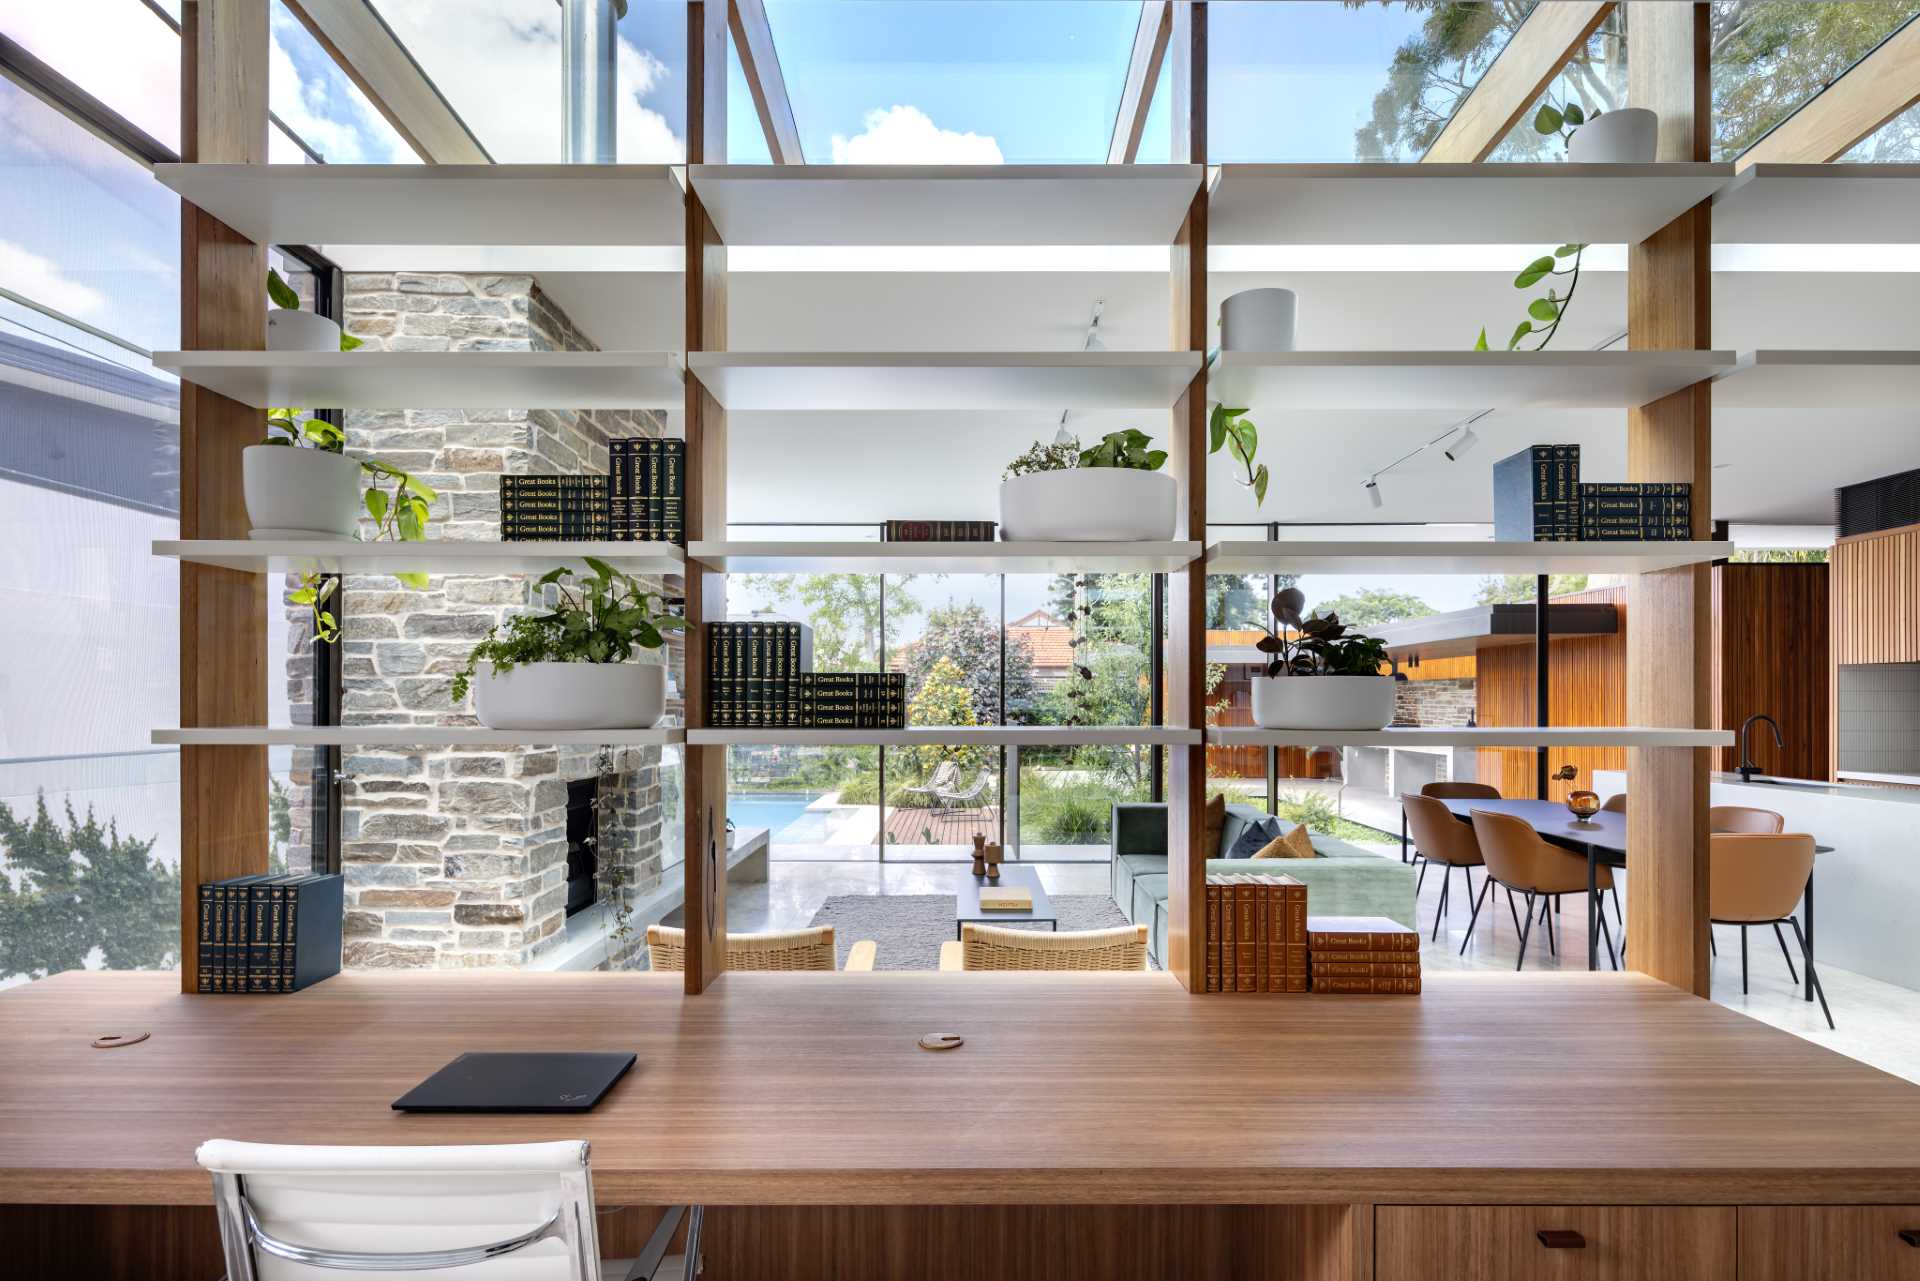 An open wall of shelving below a skylight separates the living room from a home office.